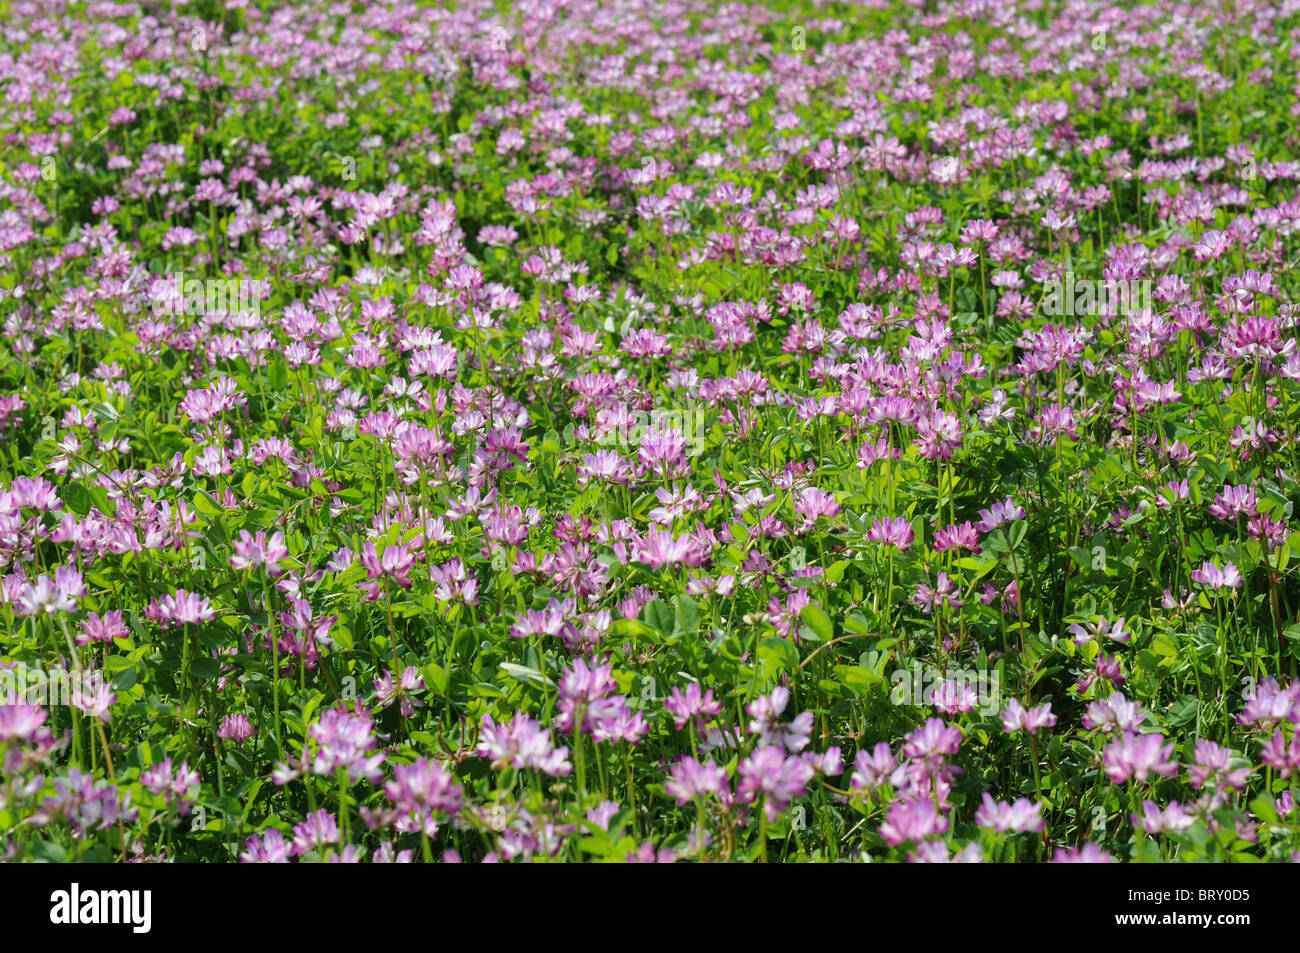 Chinese Milk Vetch (Astragalus sinicus) flowers, Hyogo Prefecture, Honshu, Japan Stock Photo